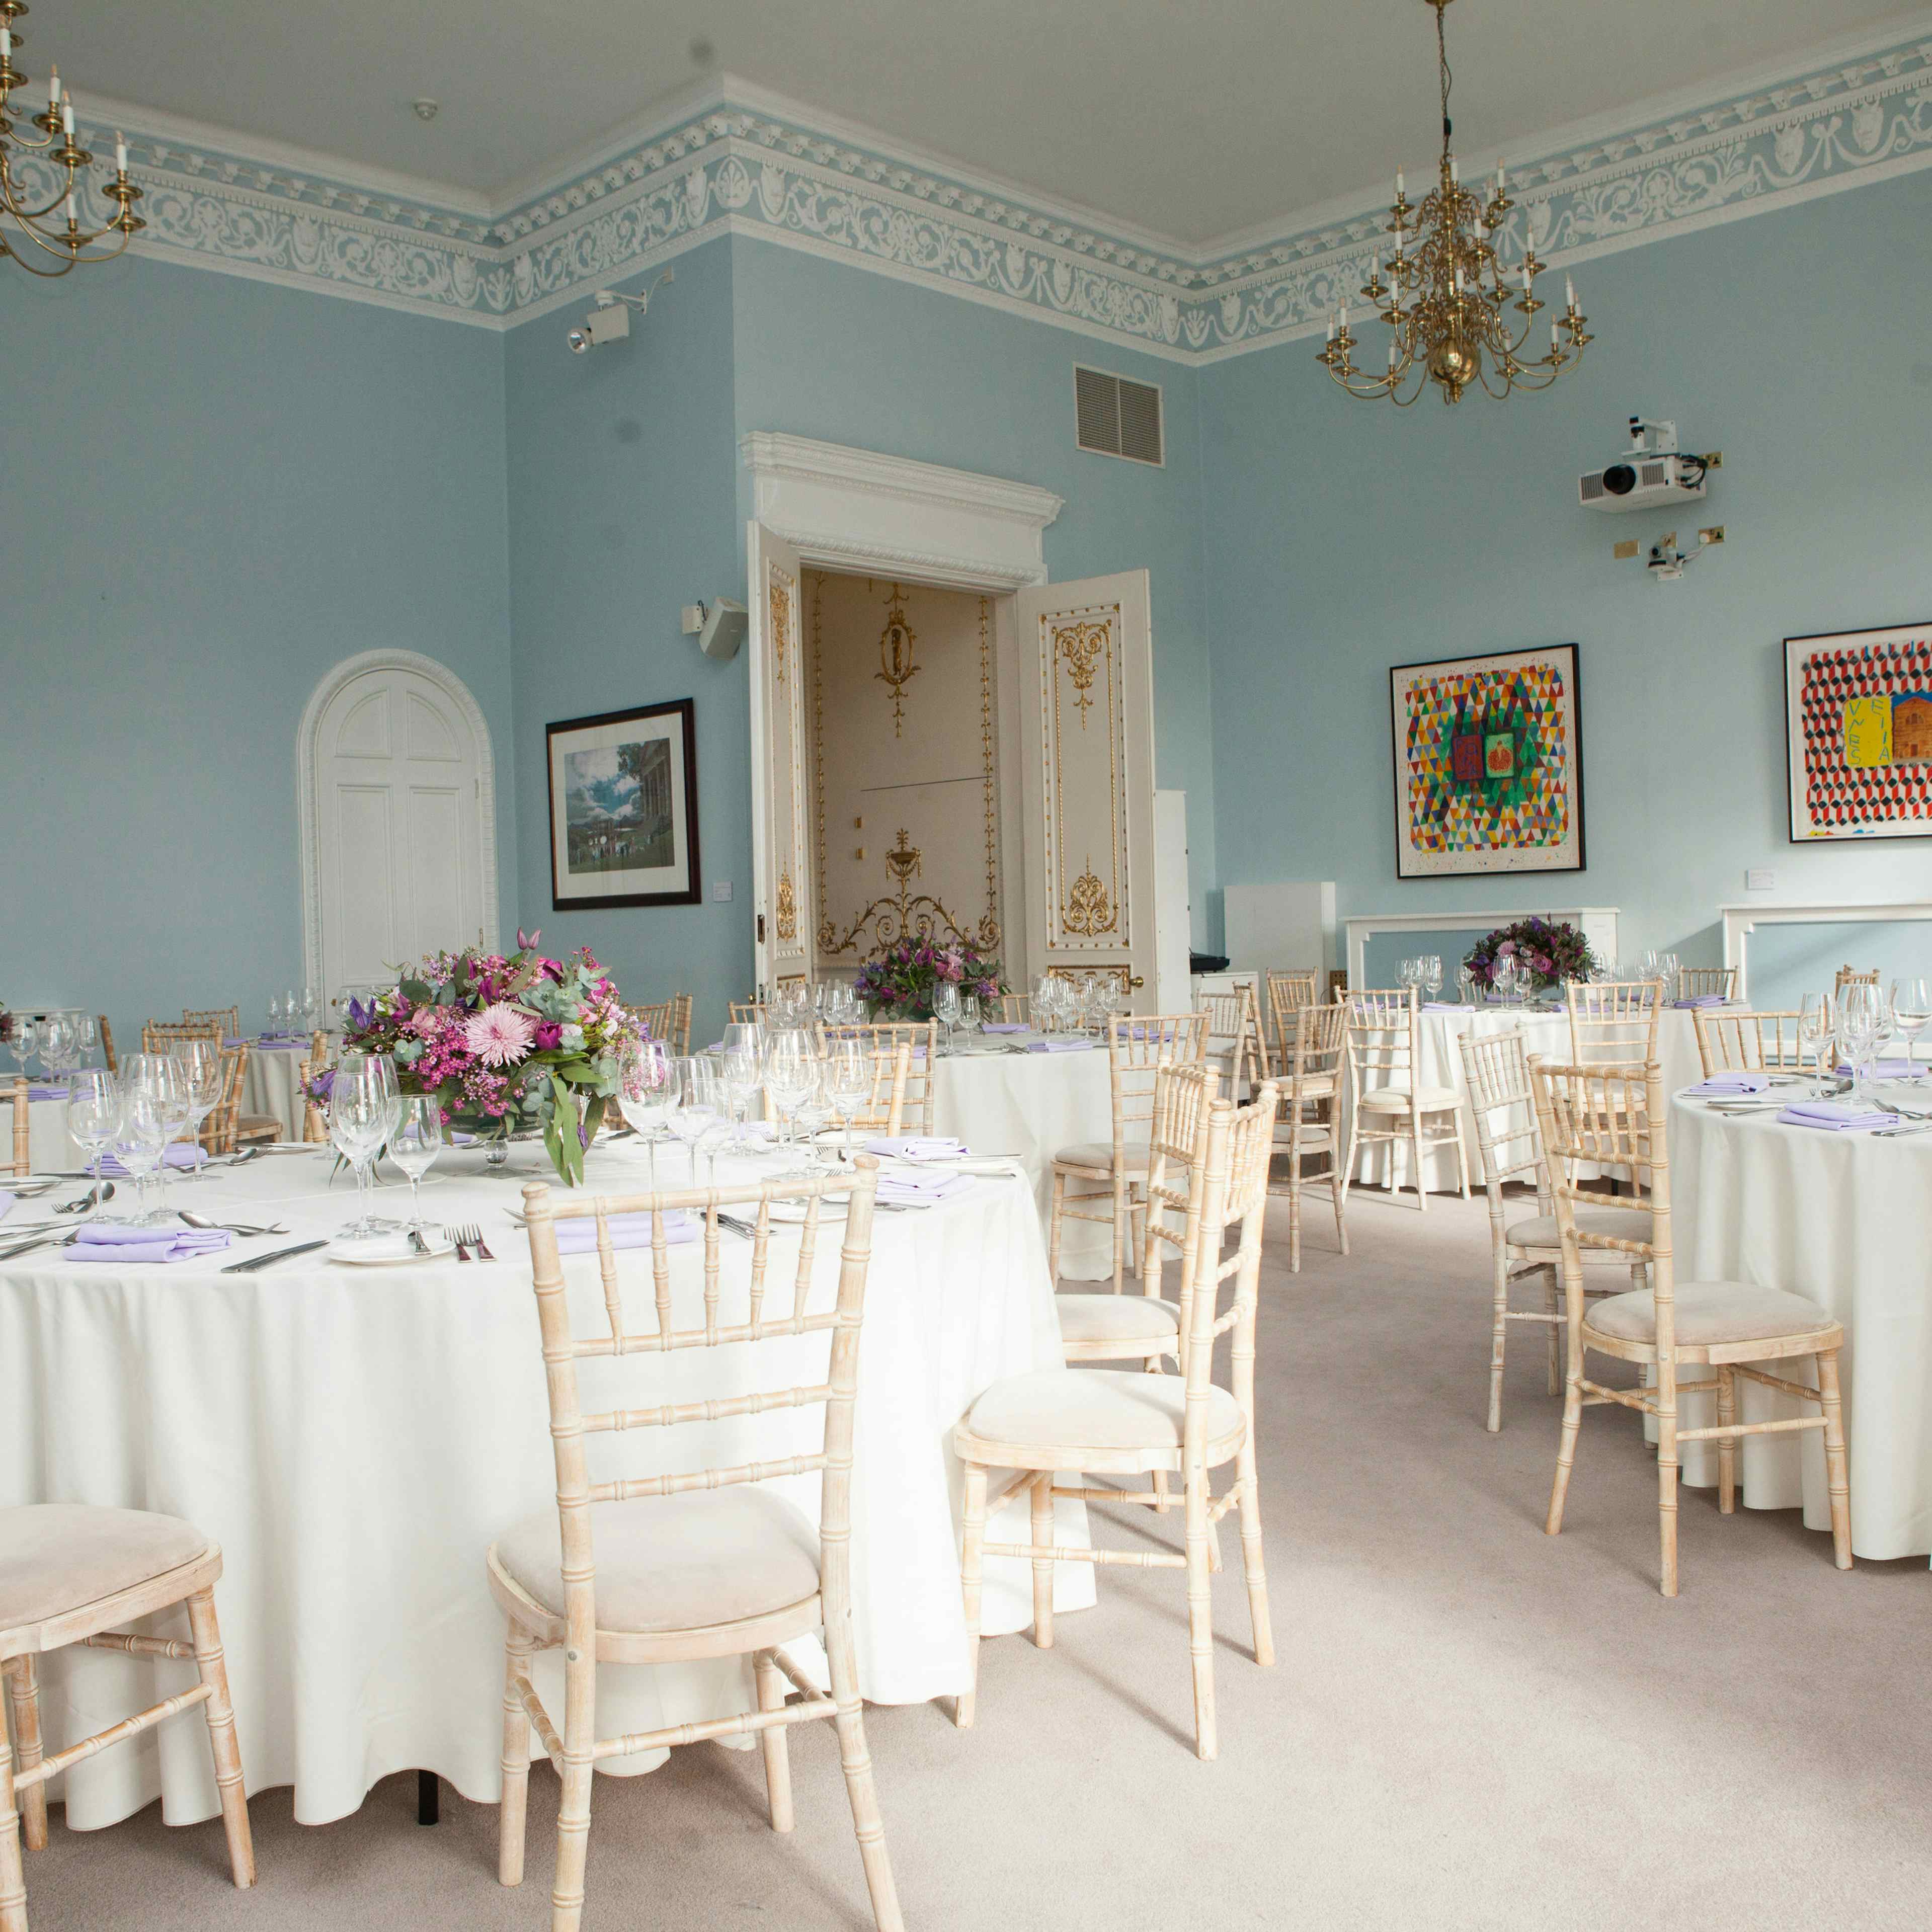 {10-11} Carlton House Terrace - Wolfson Room & Gallery image 2